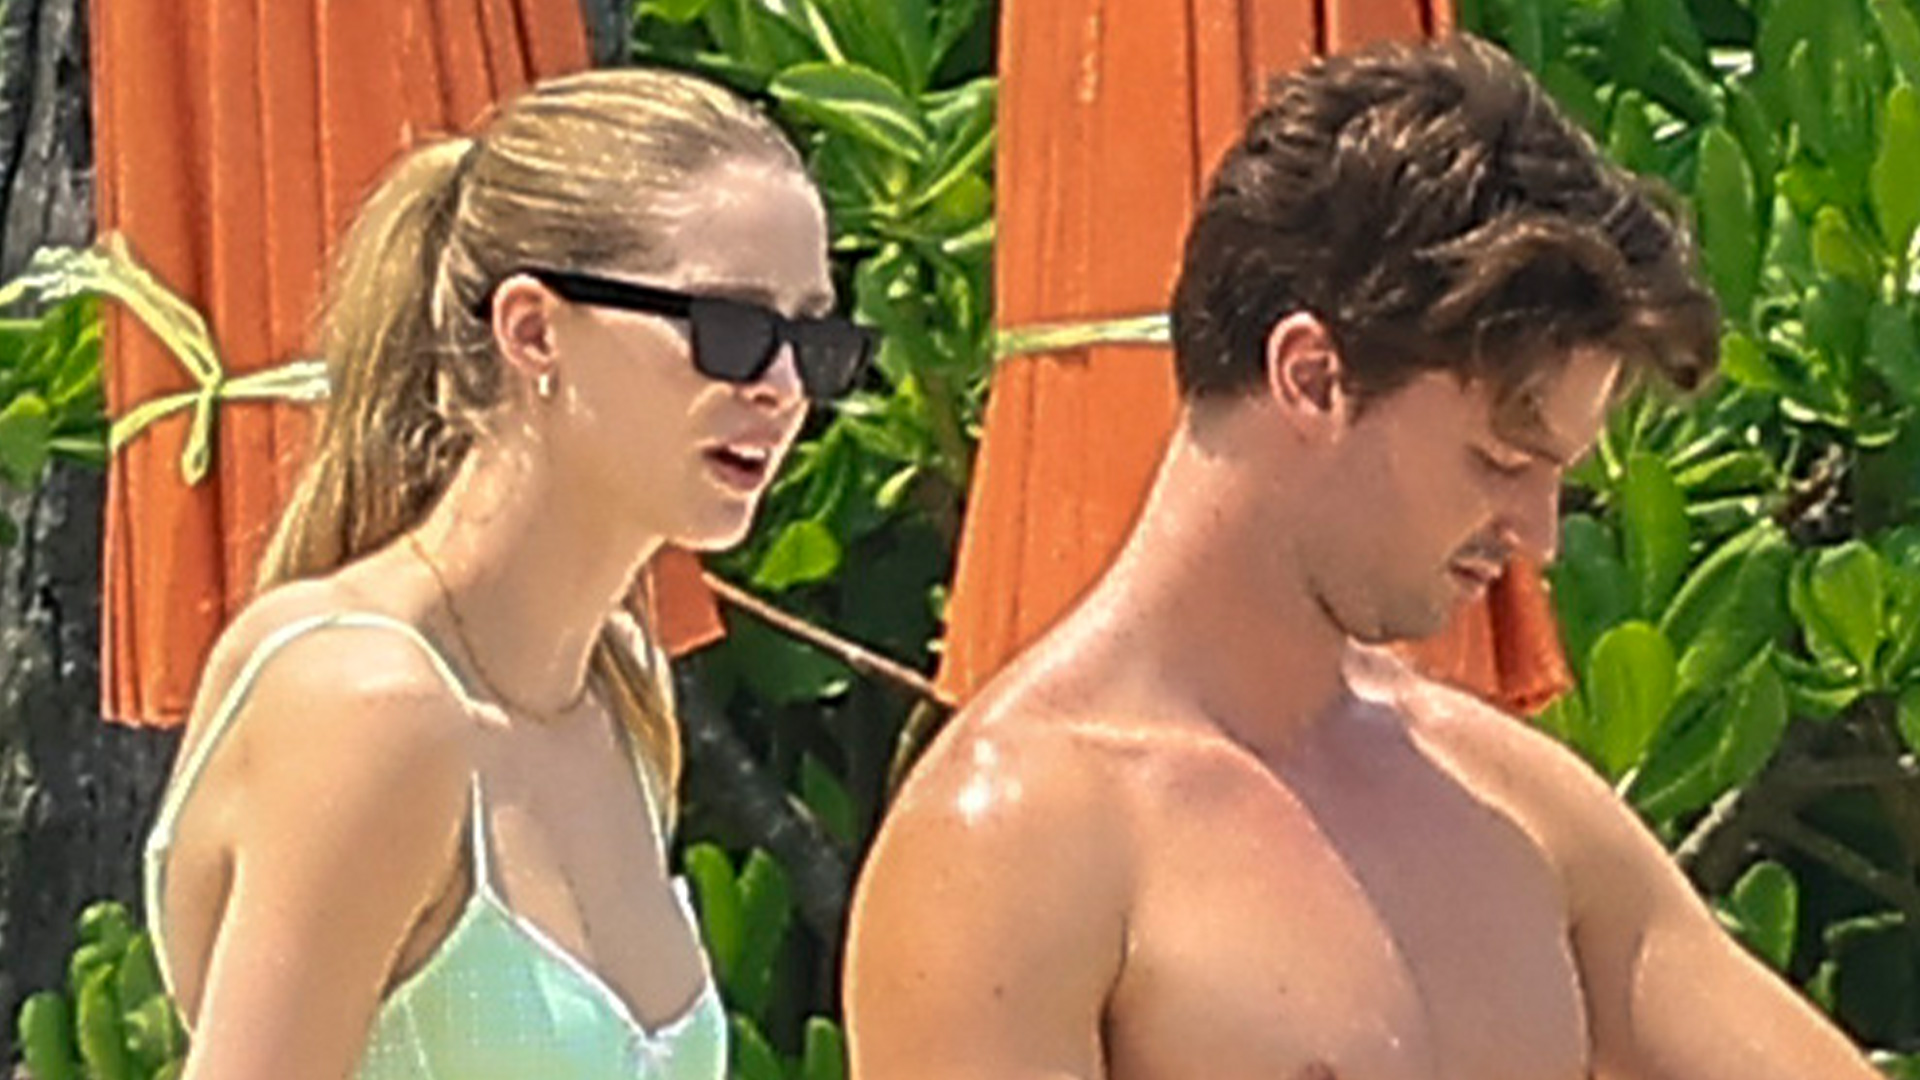 Patrick Schwarzenegger hits beach with bikini-clad fiancée Abby Champion while filming in Thailand for The White Lotus